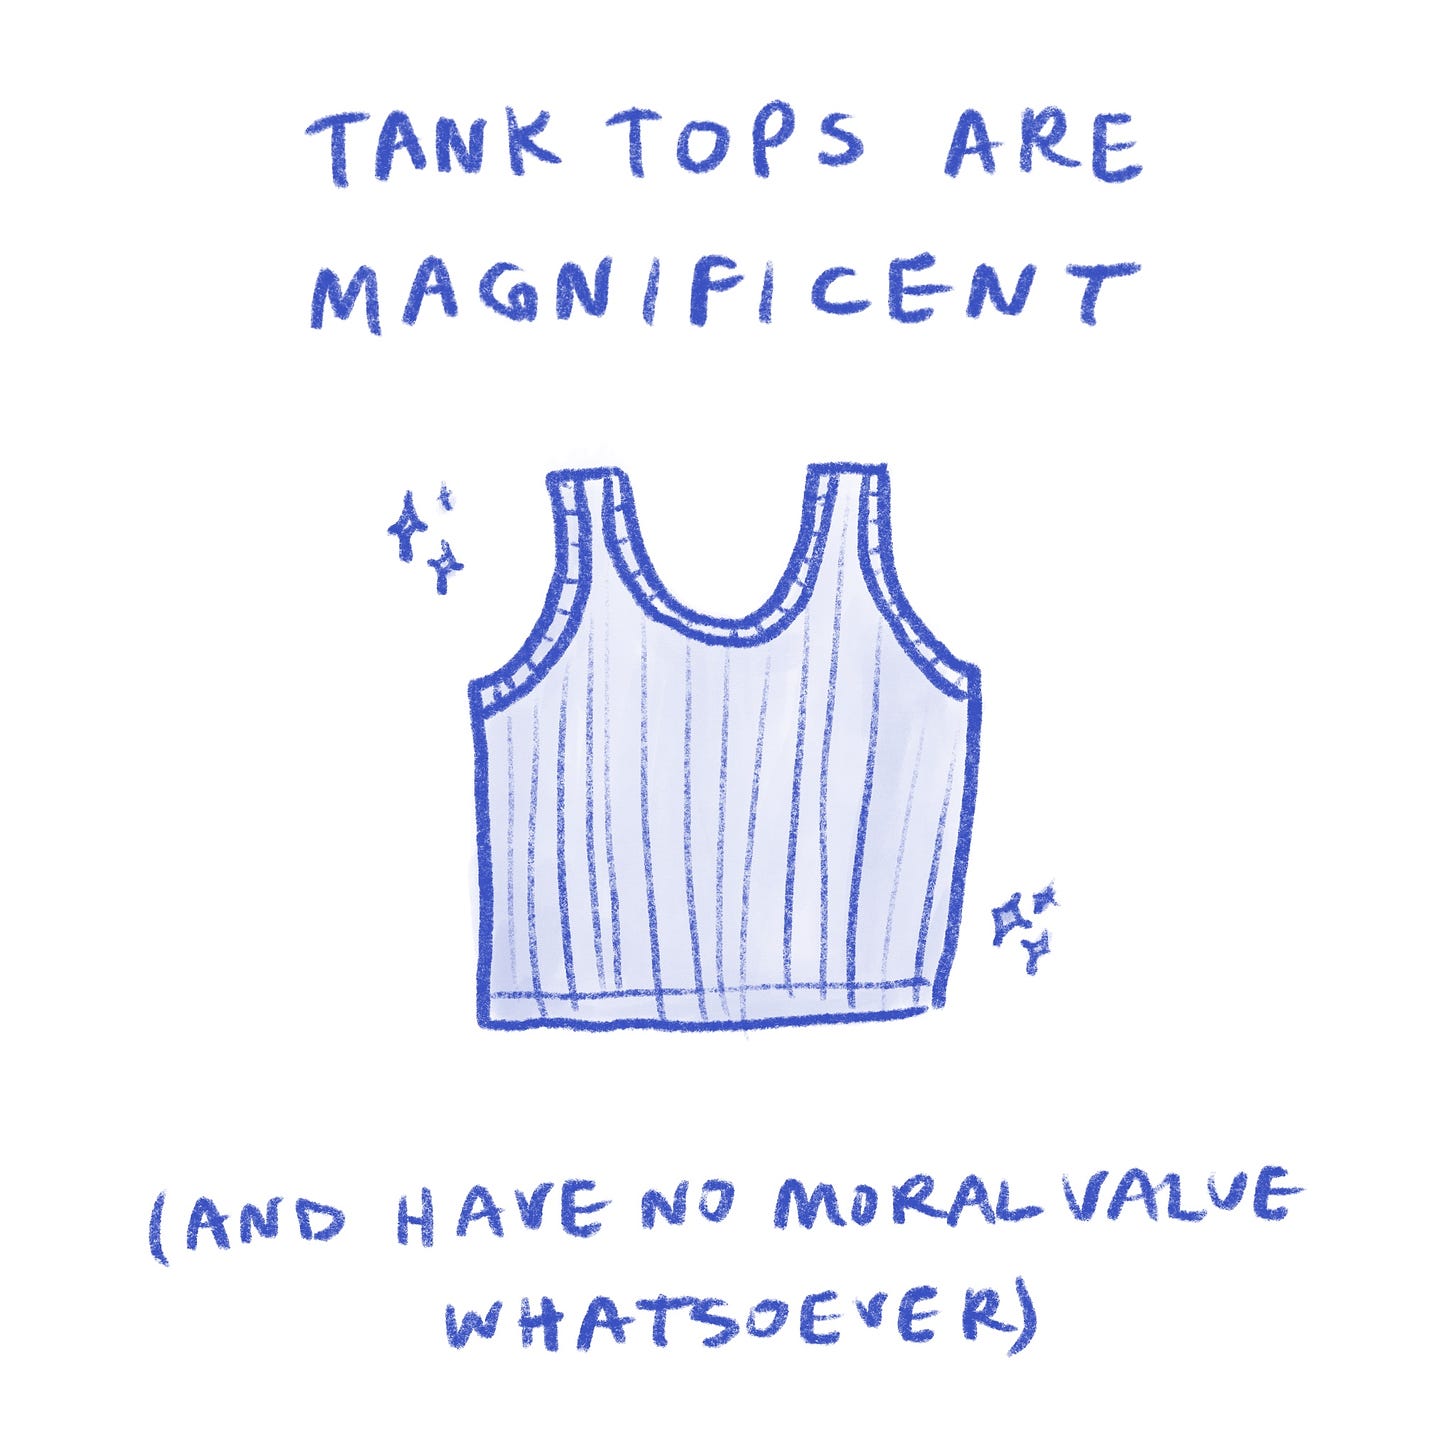 Tank tops are magnificent (and have no moral value whatsoever)